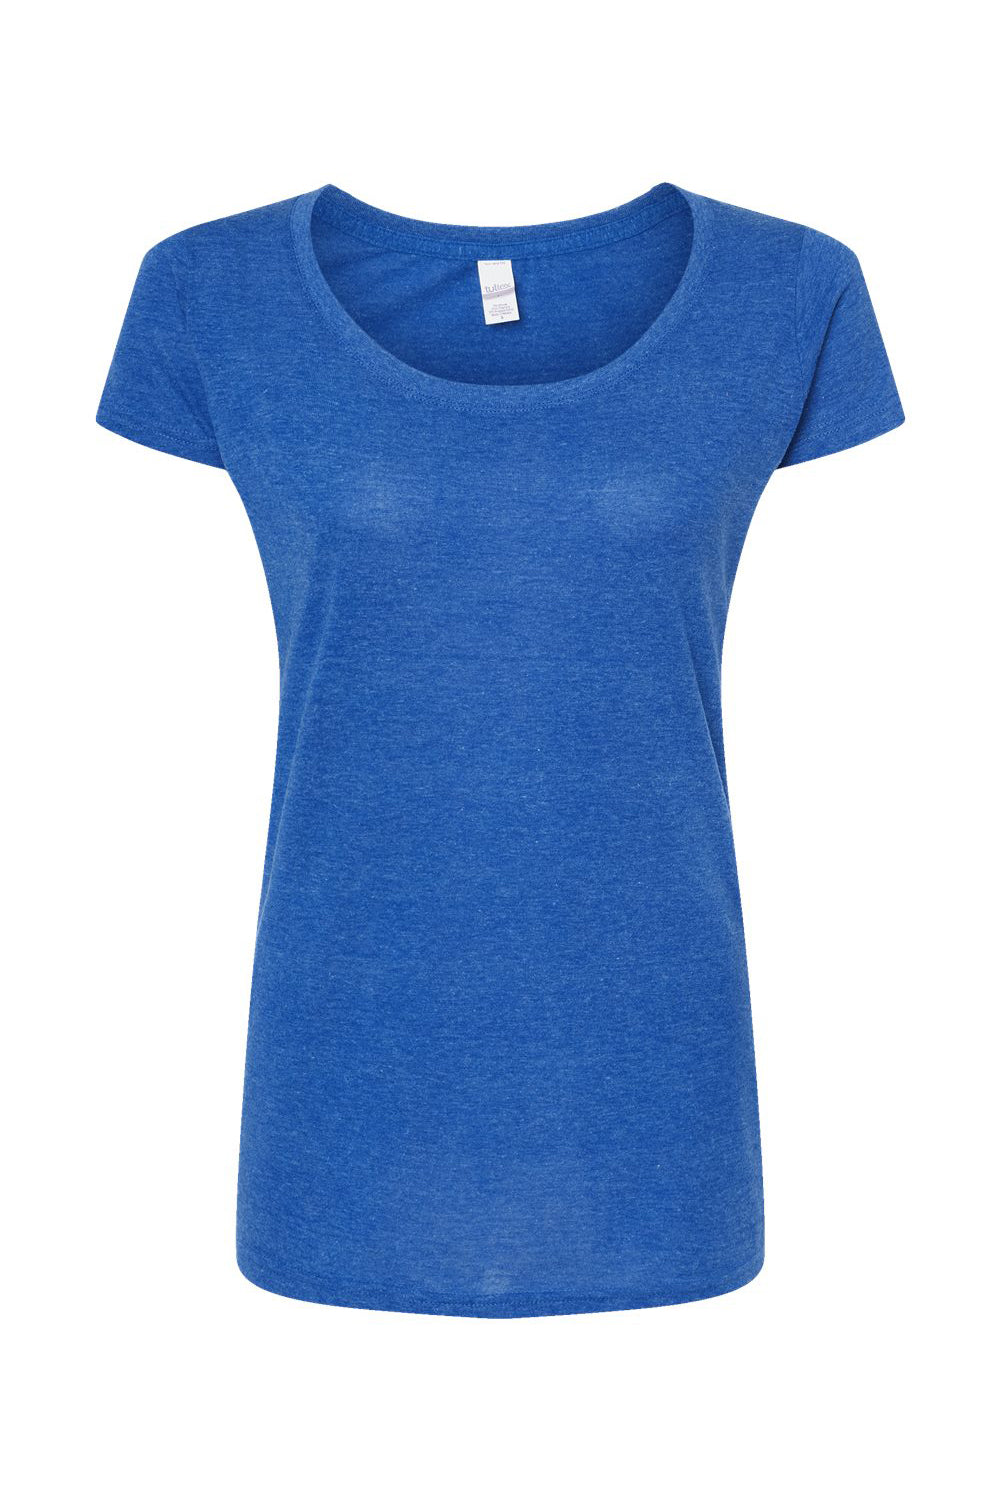 Tultex 243 Womens Poly-Rich Short Sleeve Scoop Neck T-Shirt Heather Royal Blue Flat Front